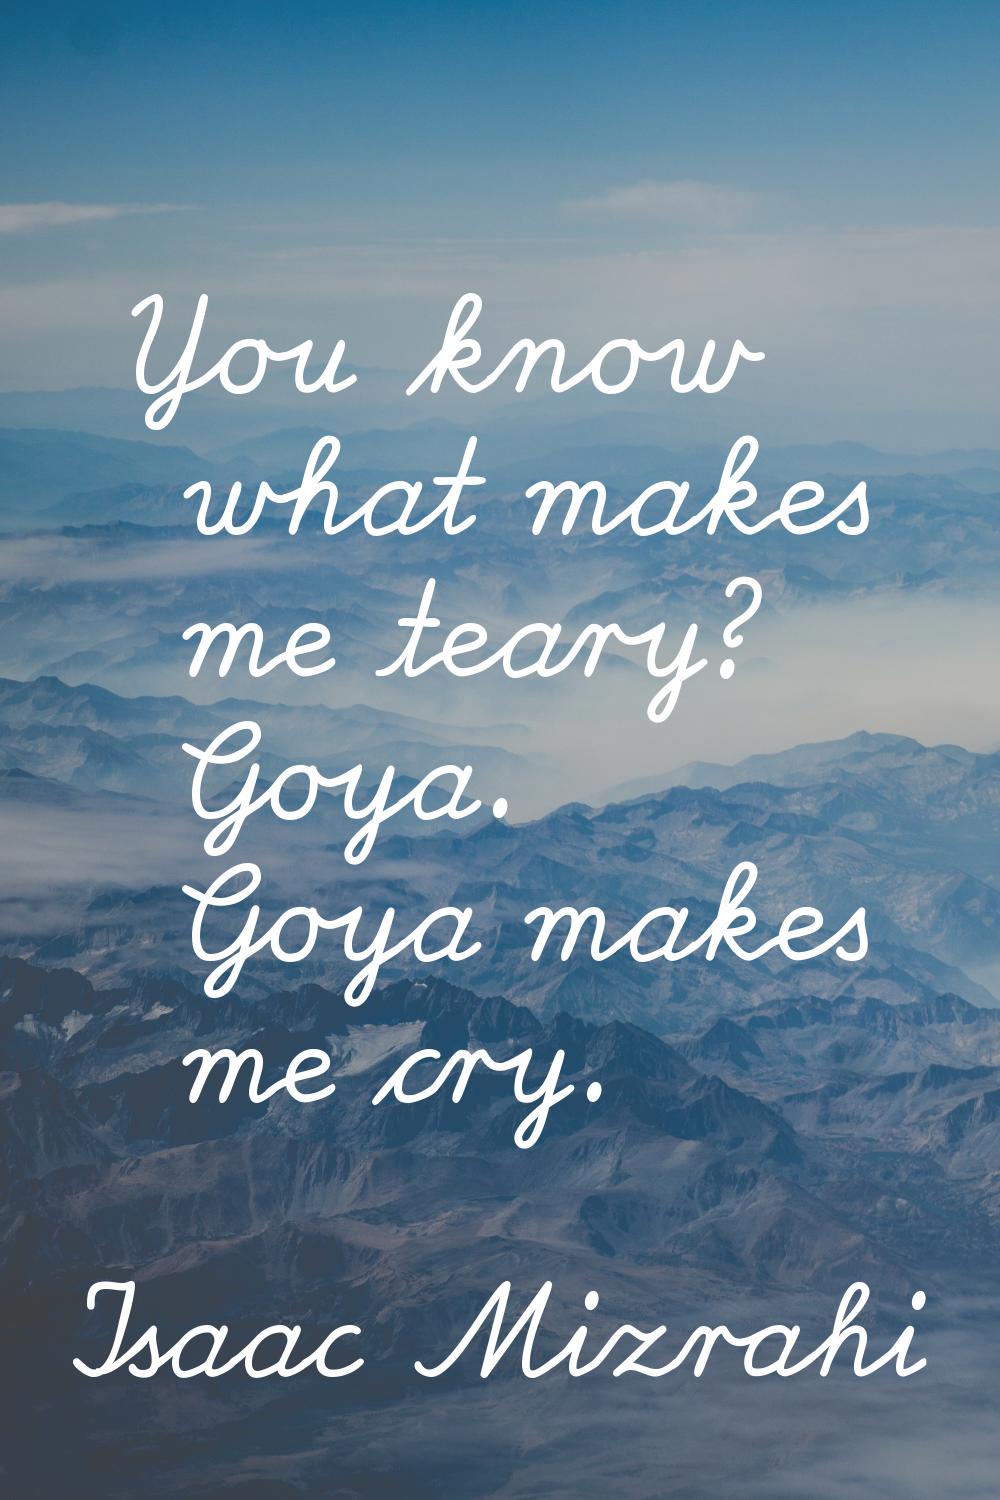 You know what makes me teary? Goya. Goya makes me cry.